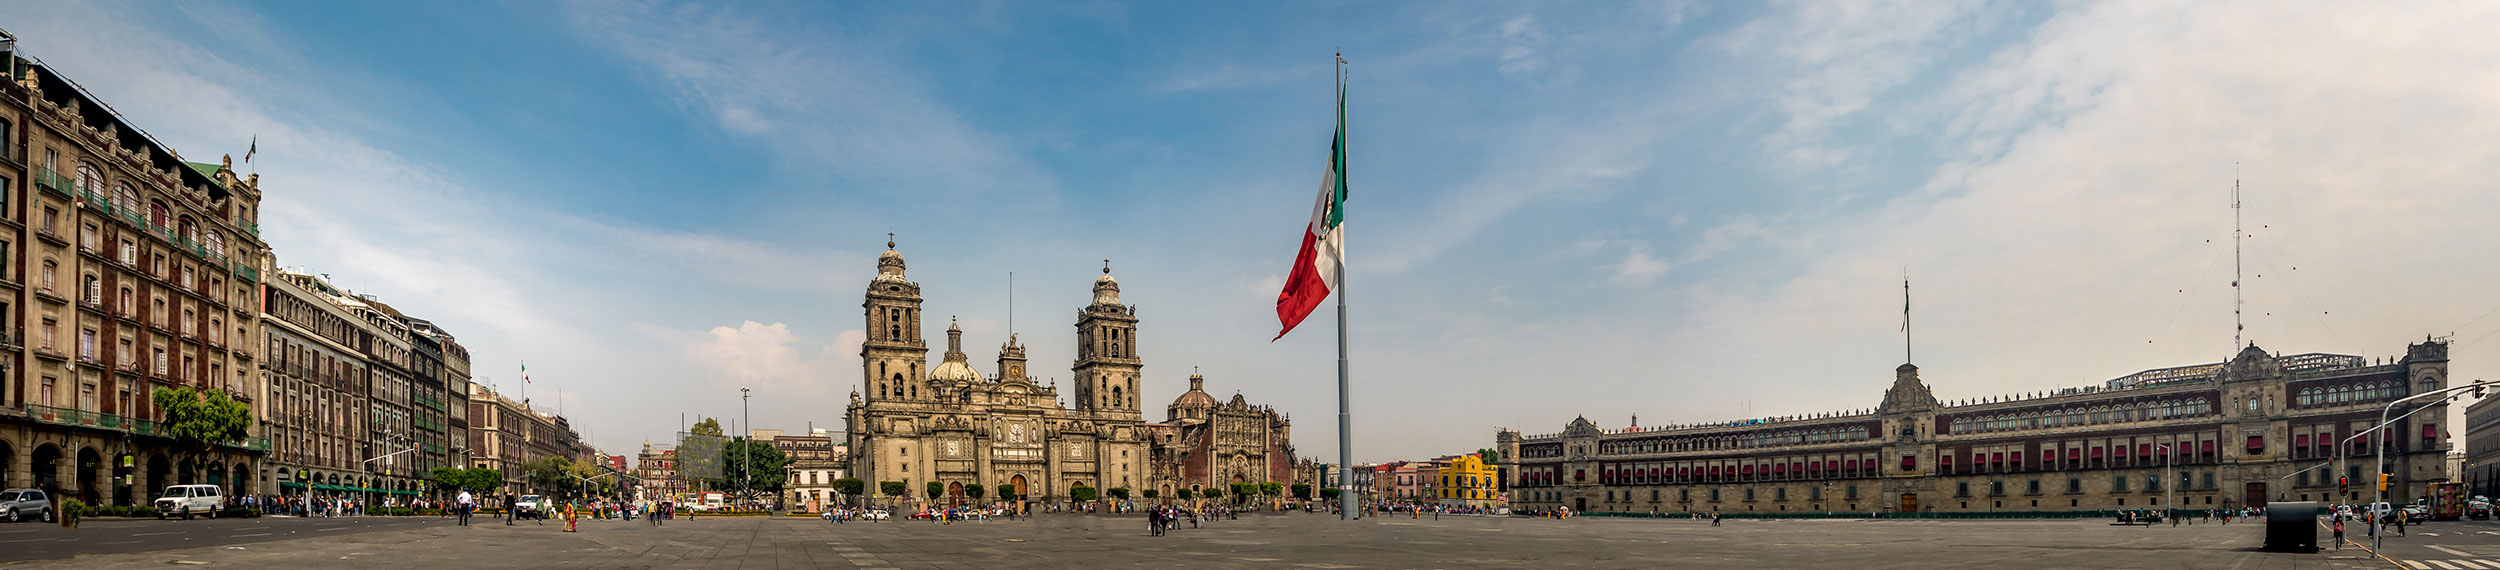 The Mexican flag blows in center of Zocao Square with a view of the Mexico City Cathedral and President's Palace in Mexico City, Mexico.